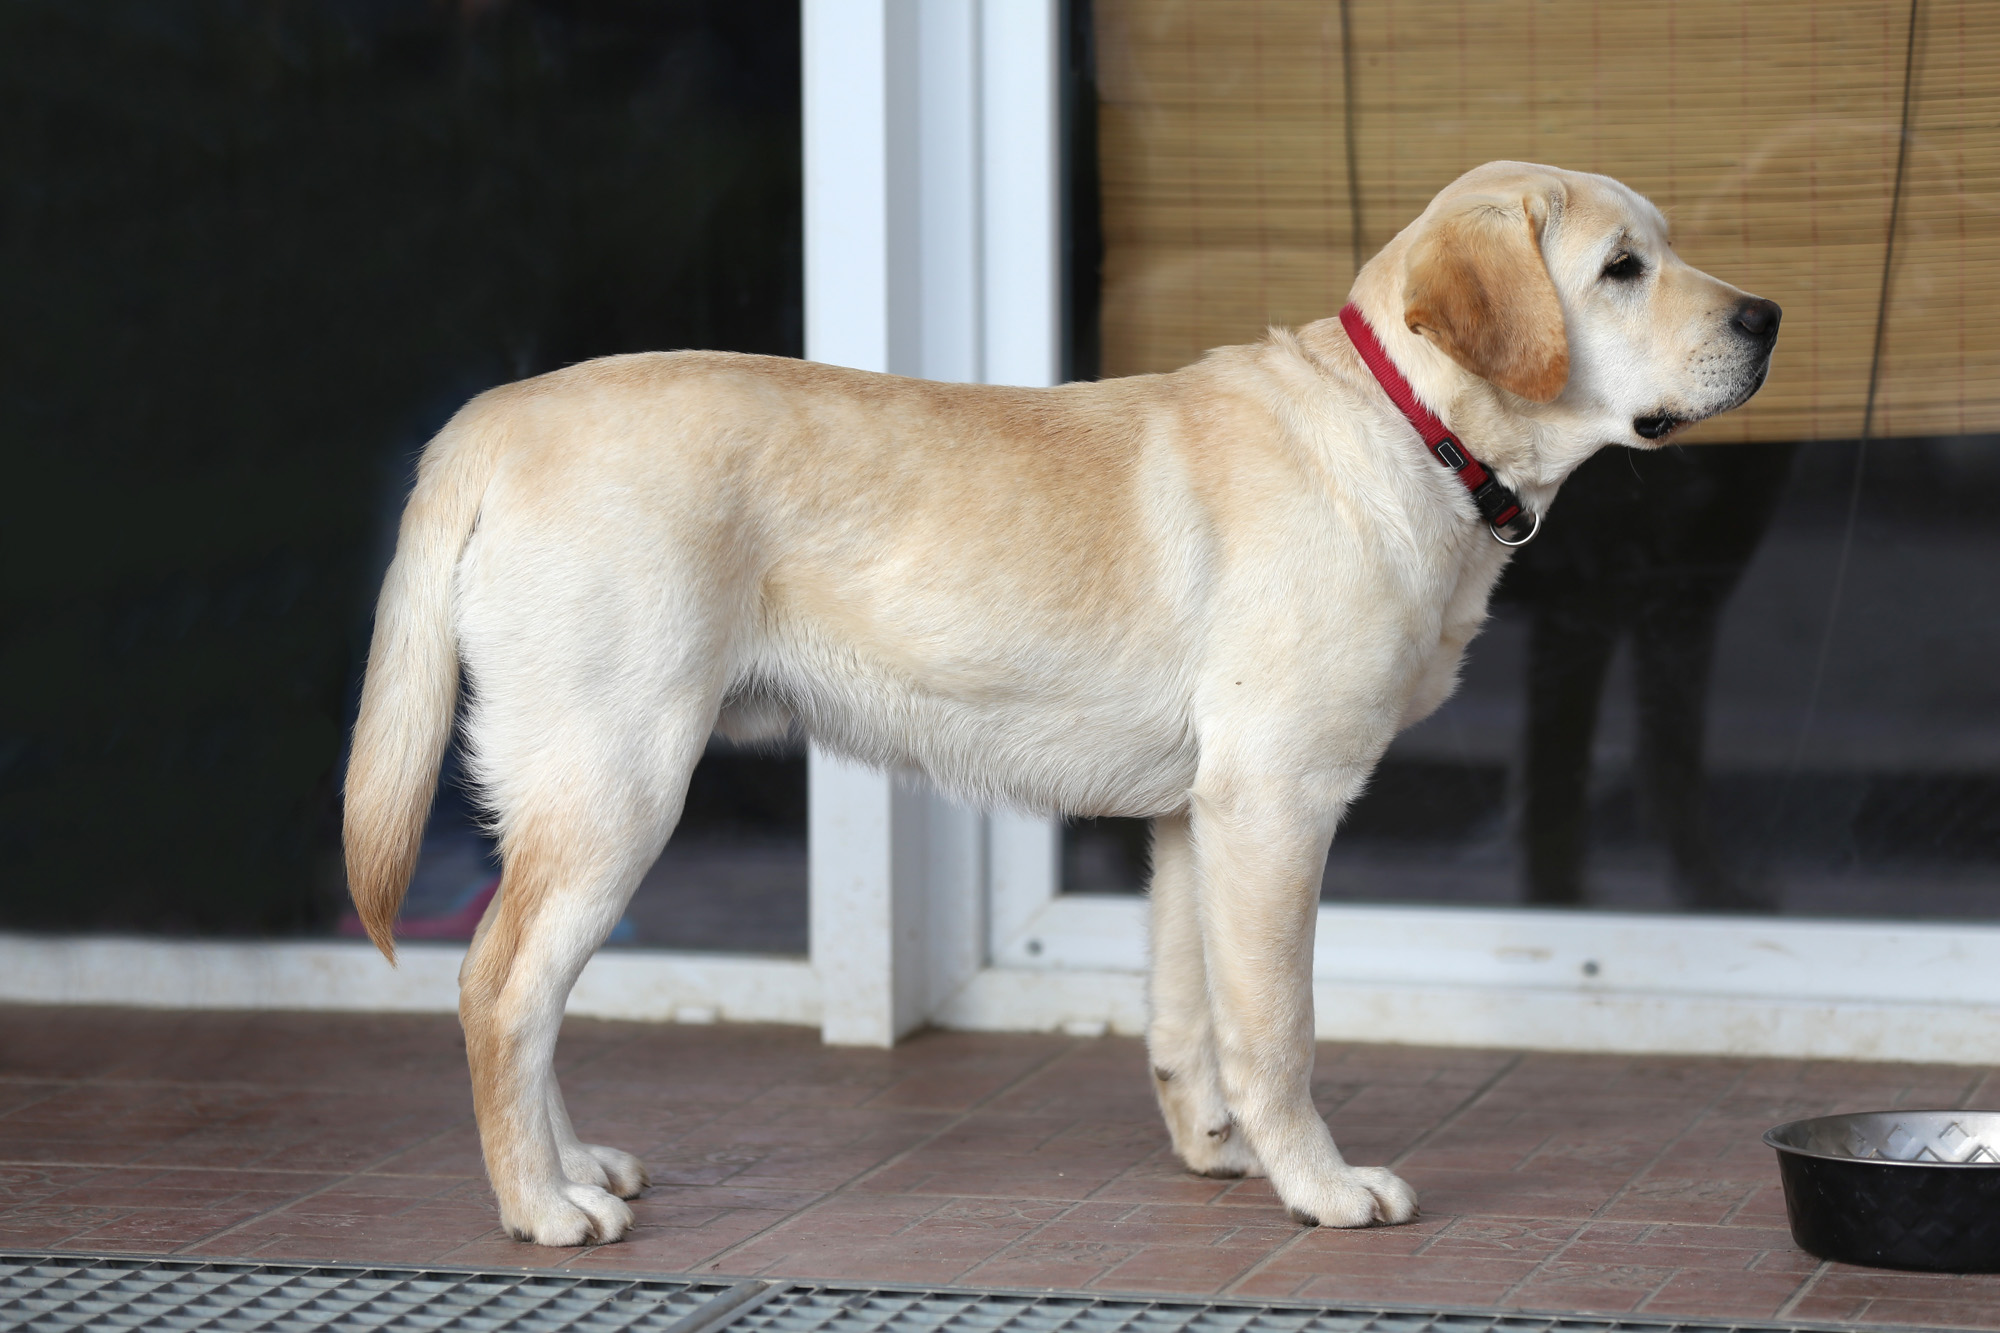 An English Lab has a blocky head, short legs, and straight tail